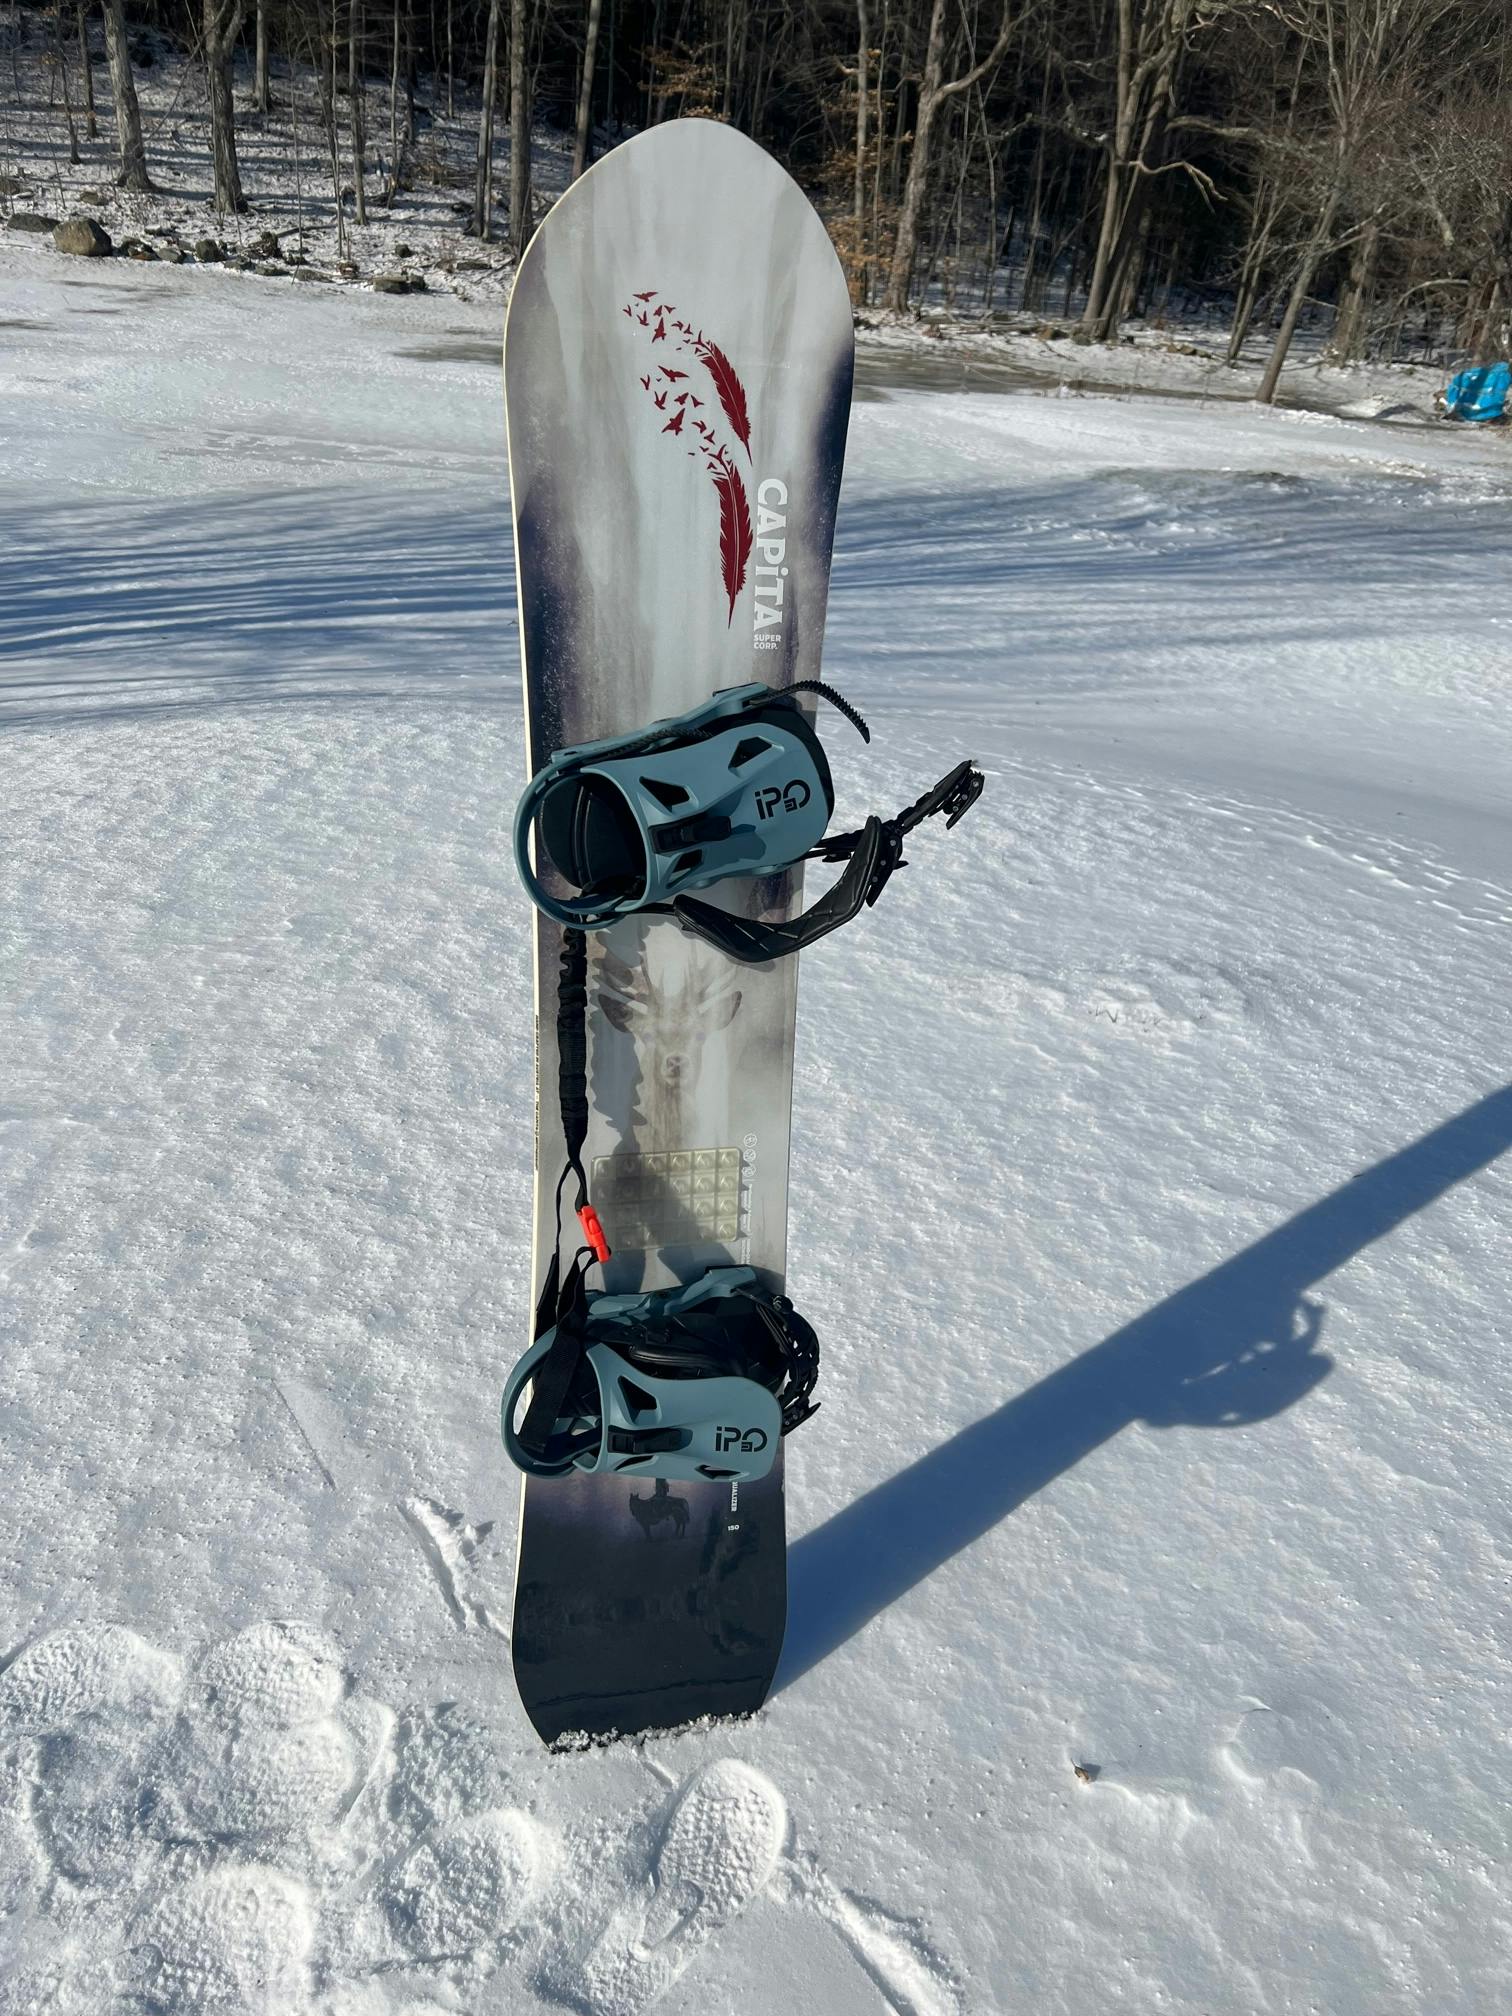 The  Now Ipo Snowboard Bindings on a snowboard.